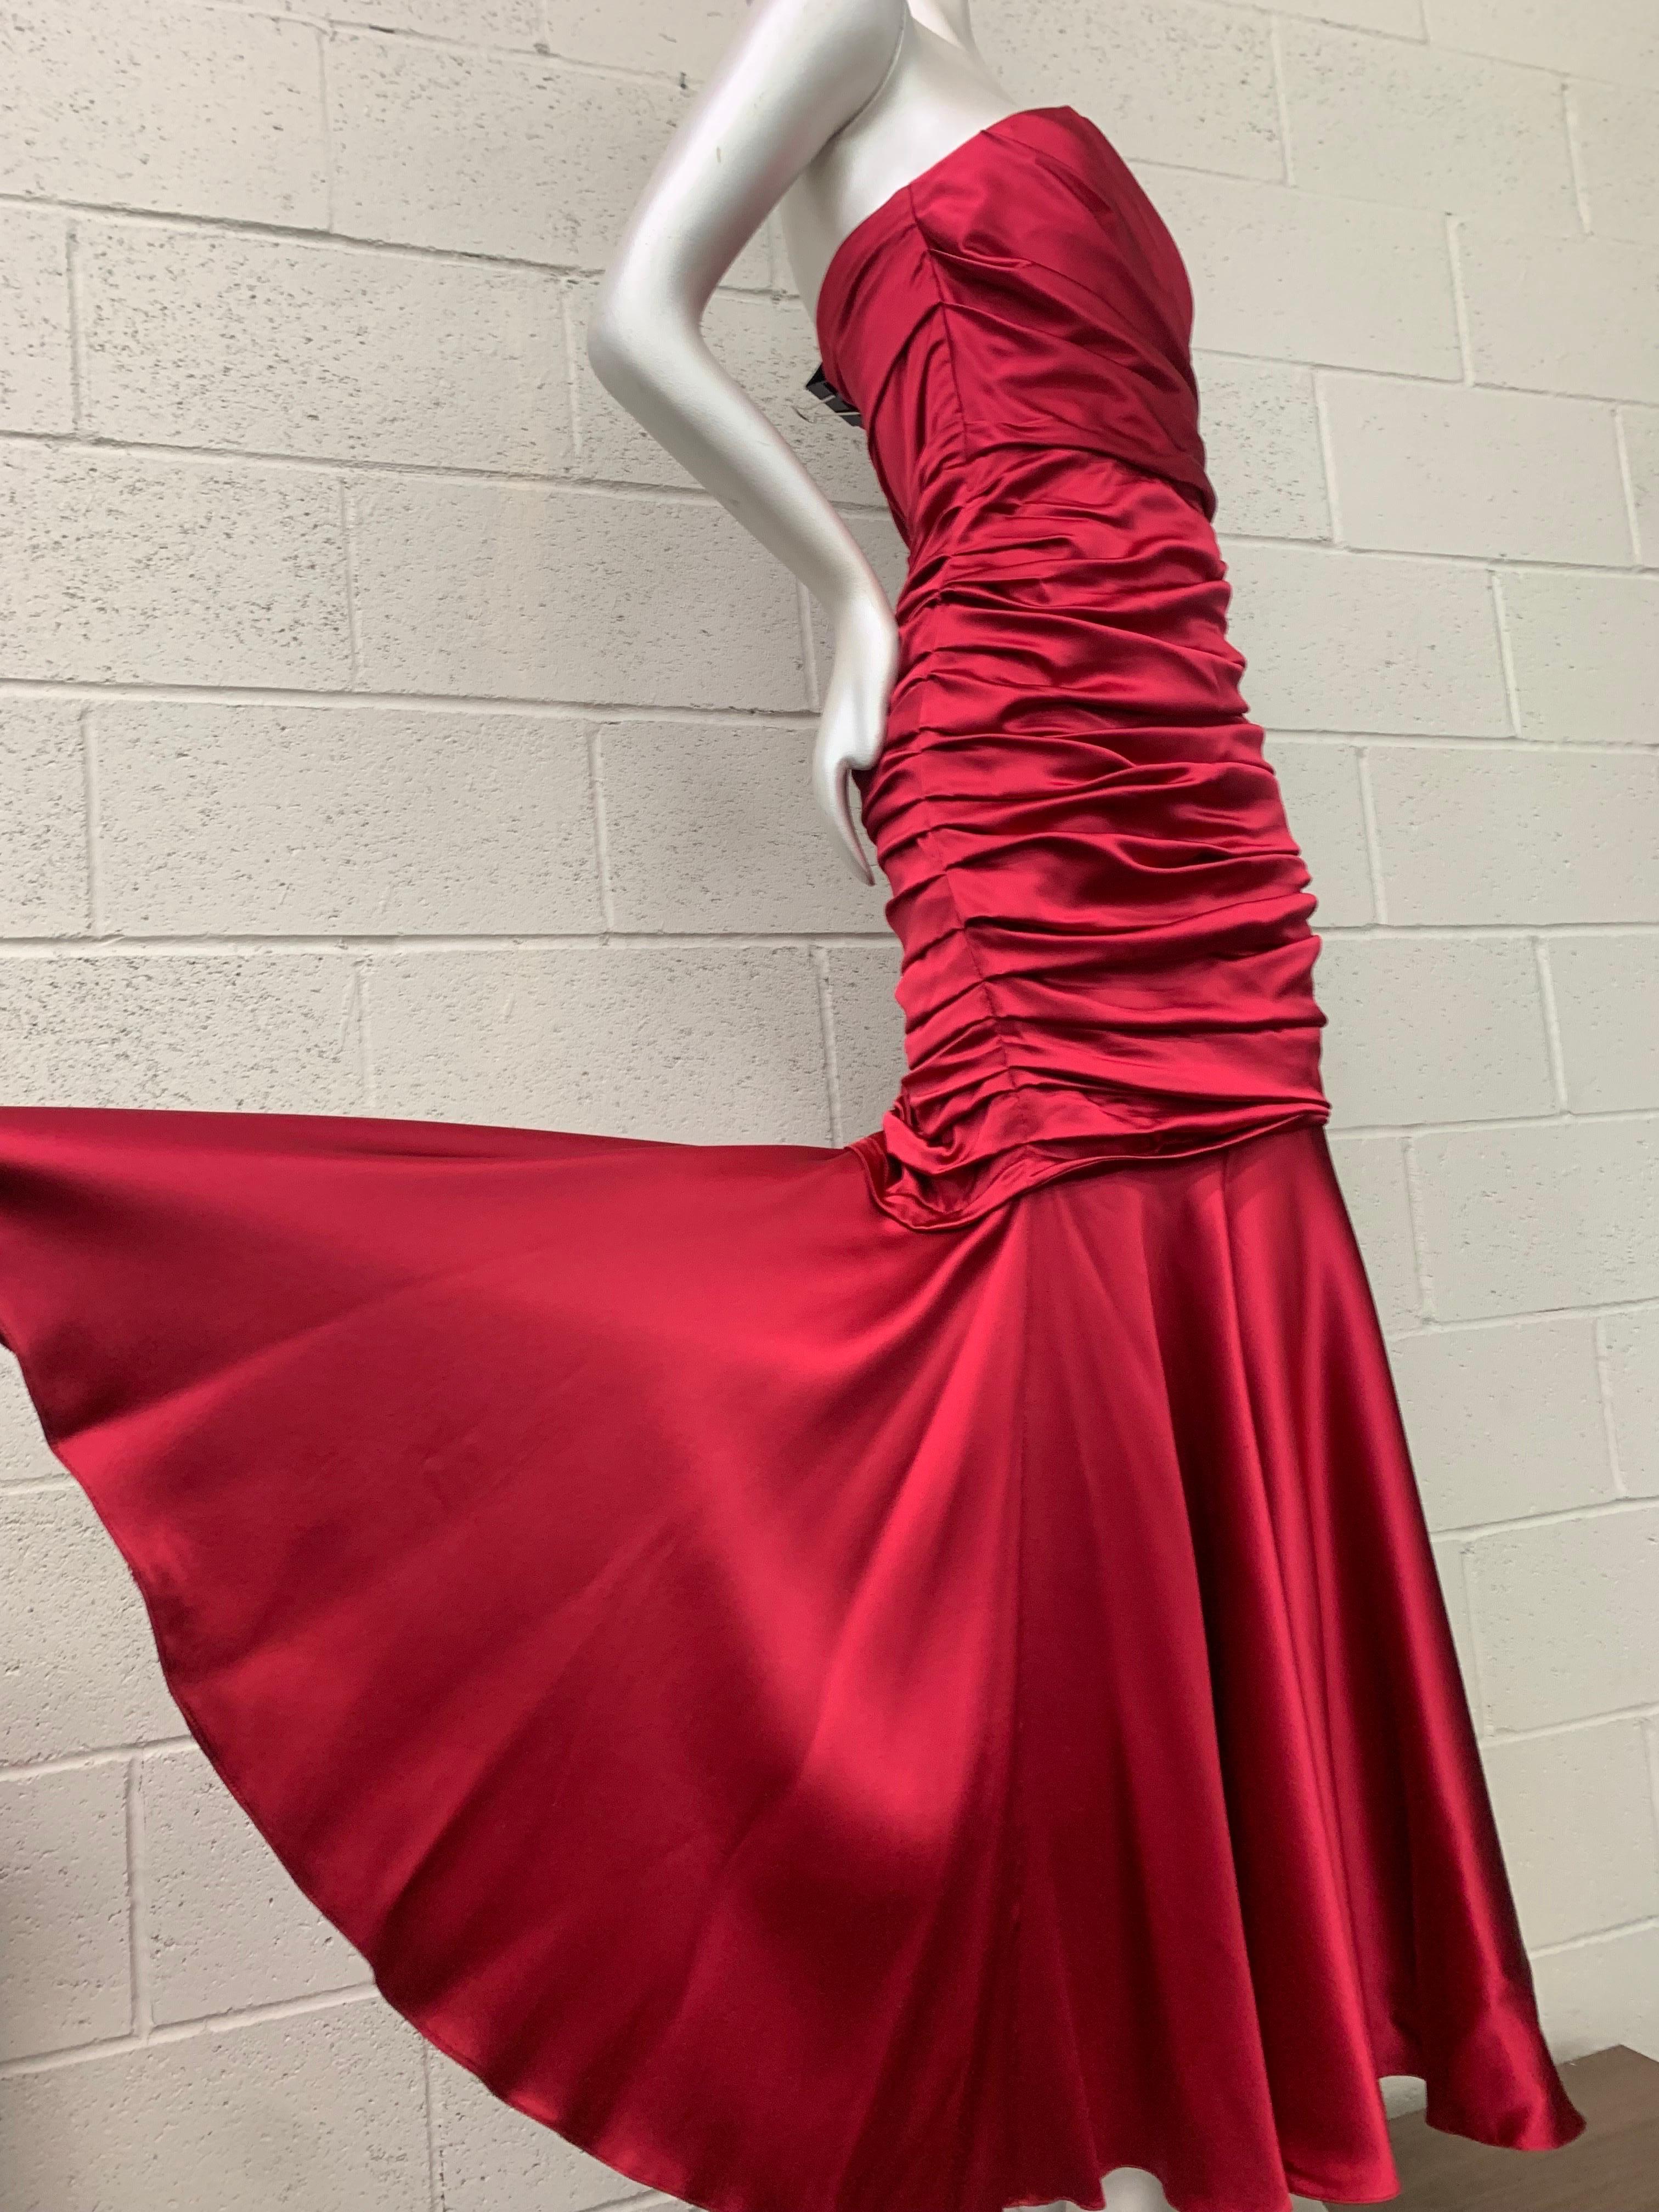 Dolce & Gabbana Red Satin Strapless Corset Gown w Fishtail Hem & Ruched Bodice In New Condition For Sale In Gresham, OR